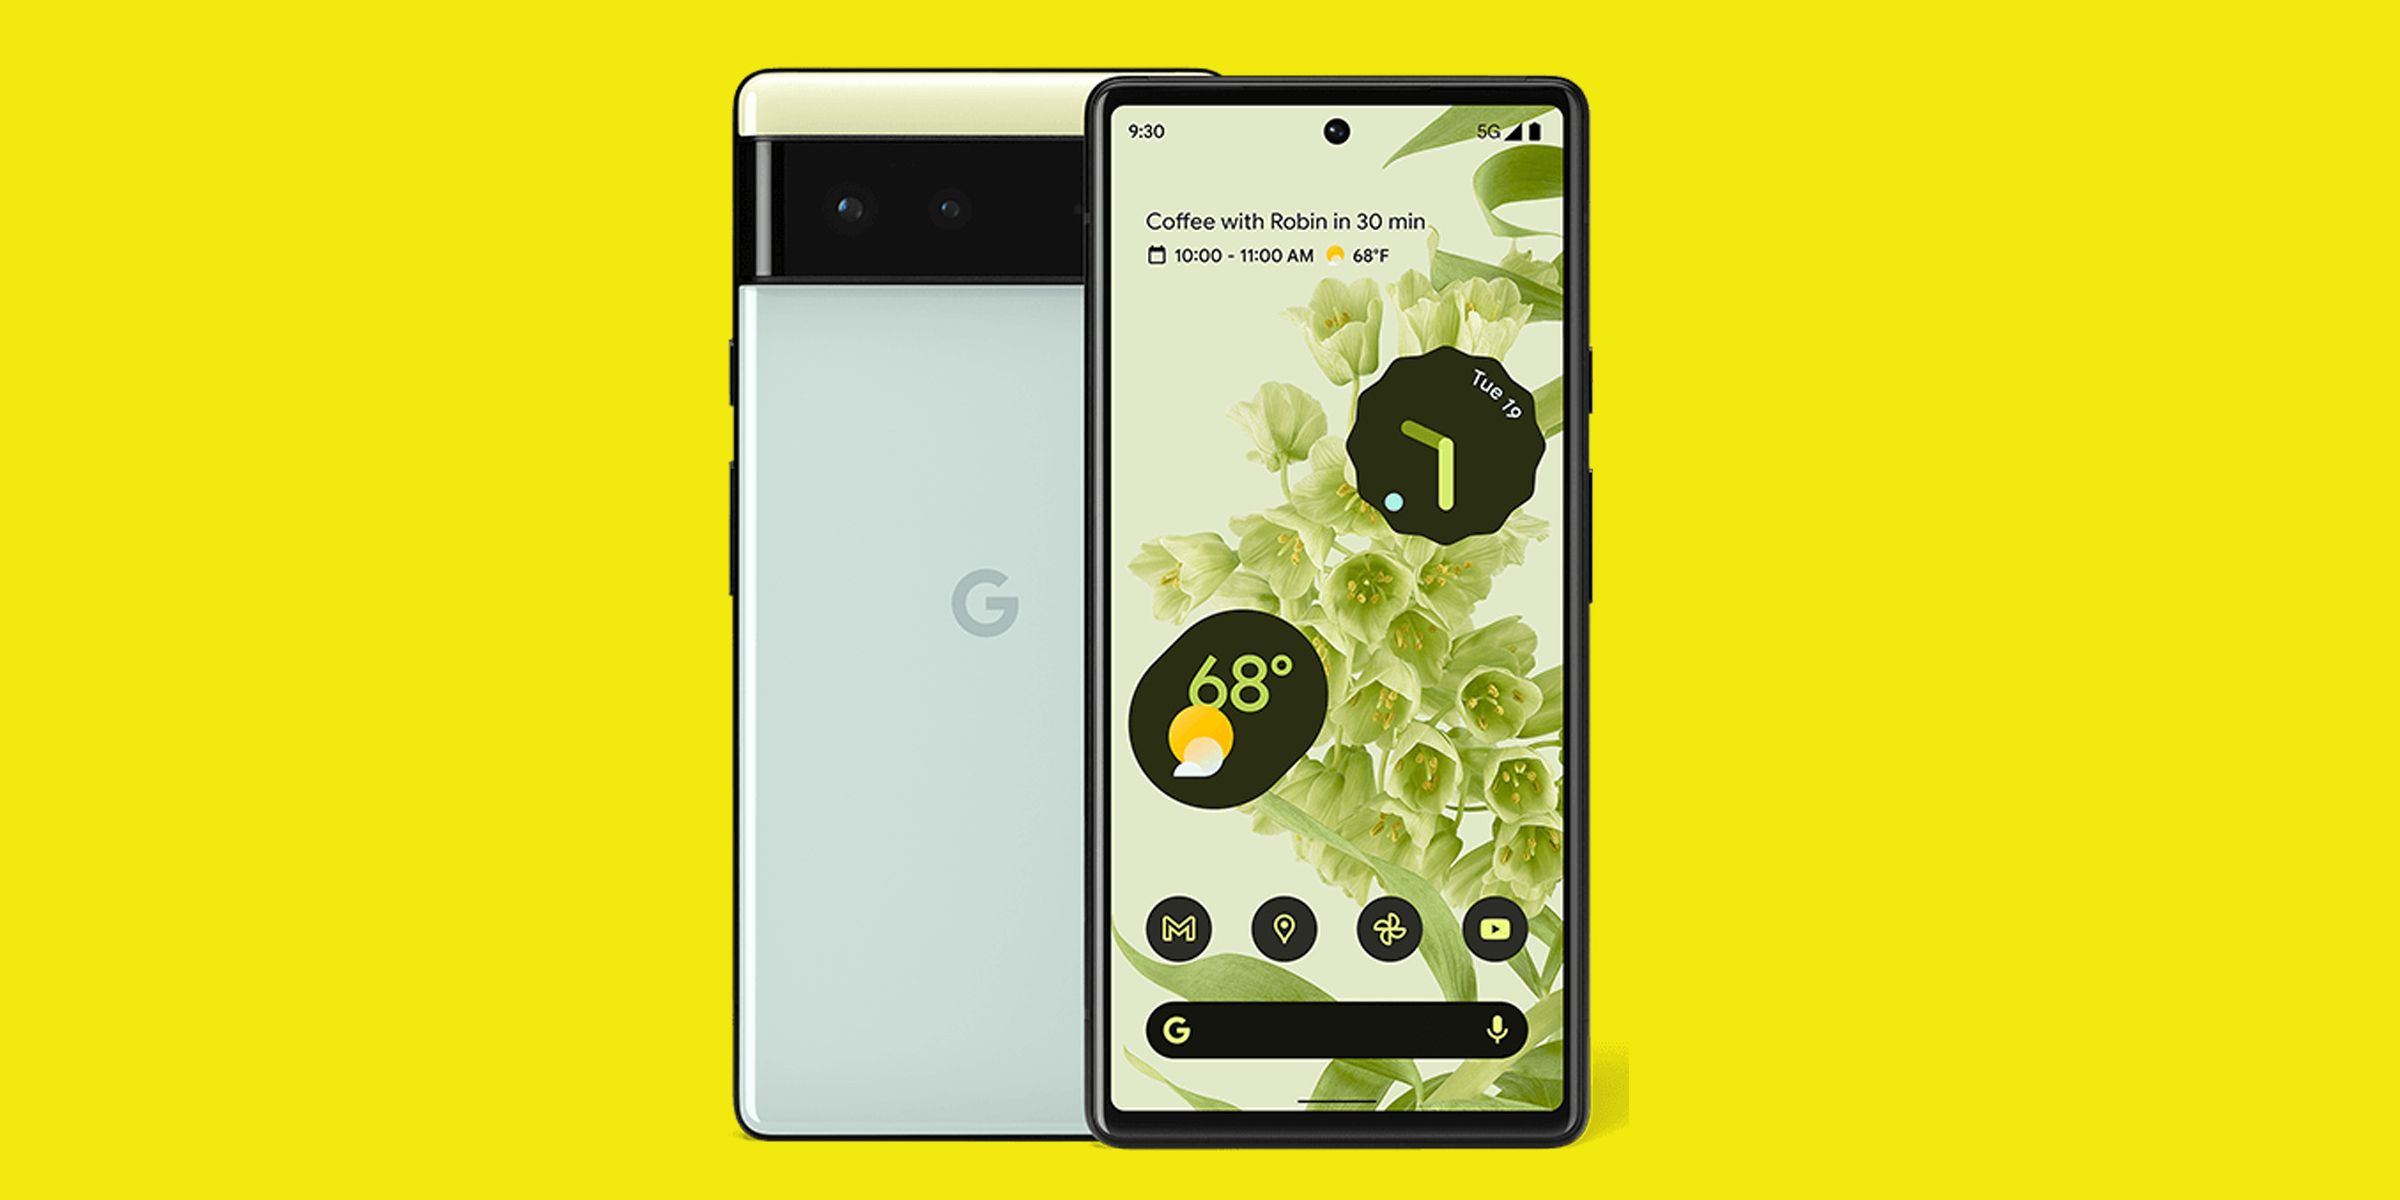 Google Pixel 6 Hits Higher Than iPhone 13 In Camera Quality Tests